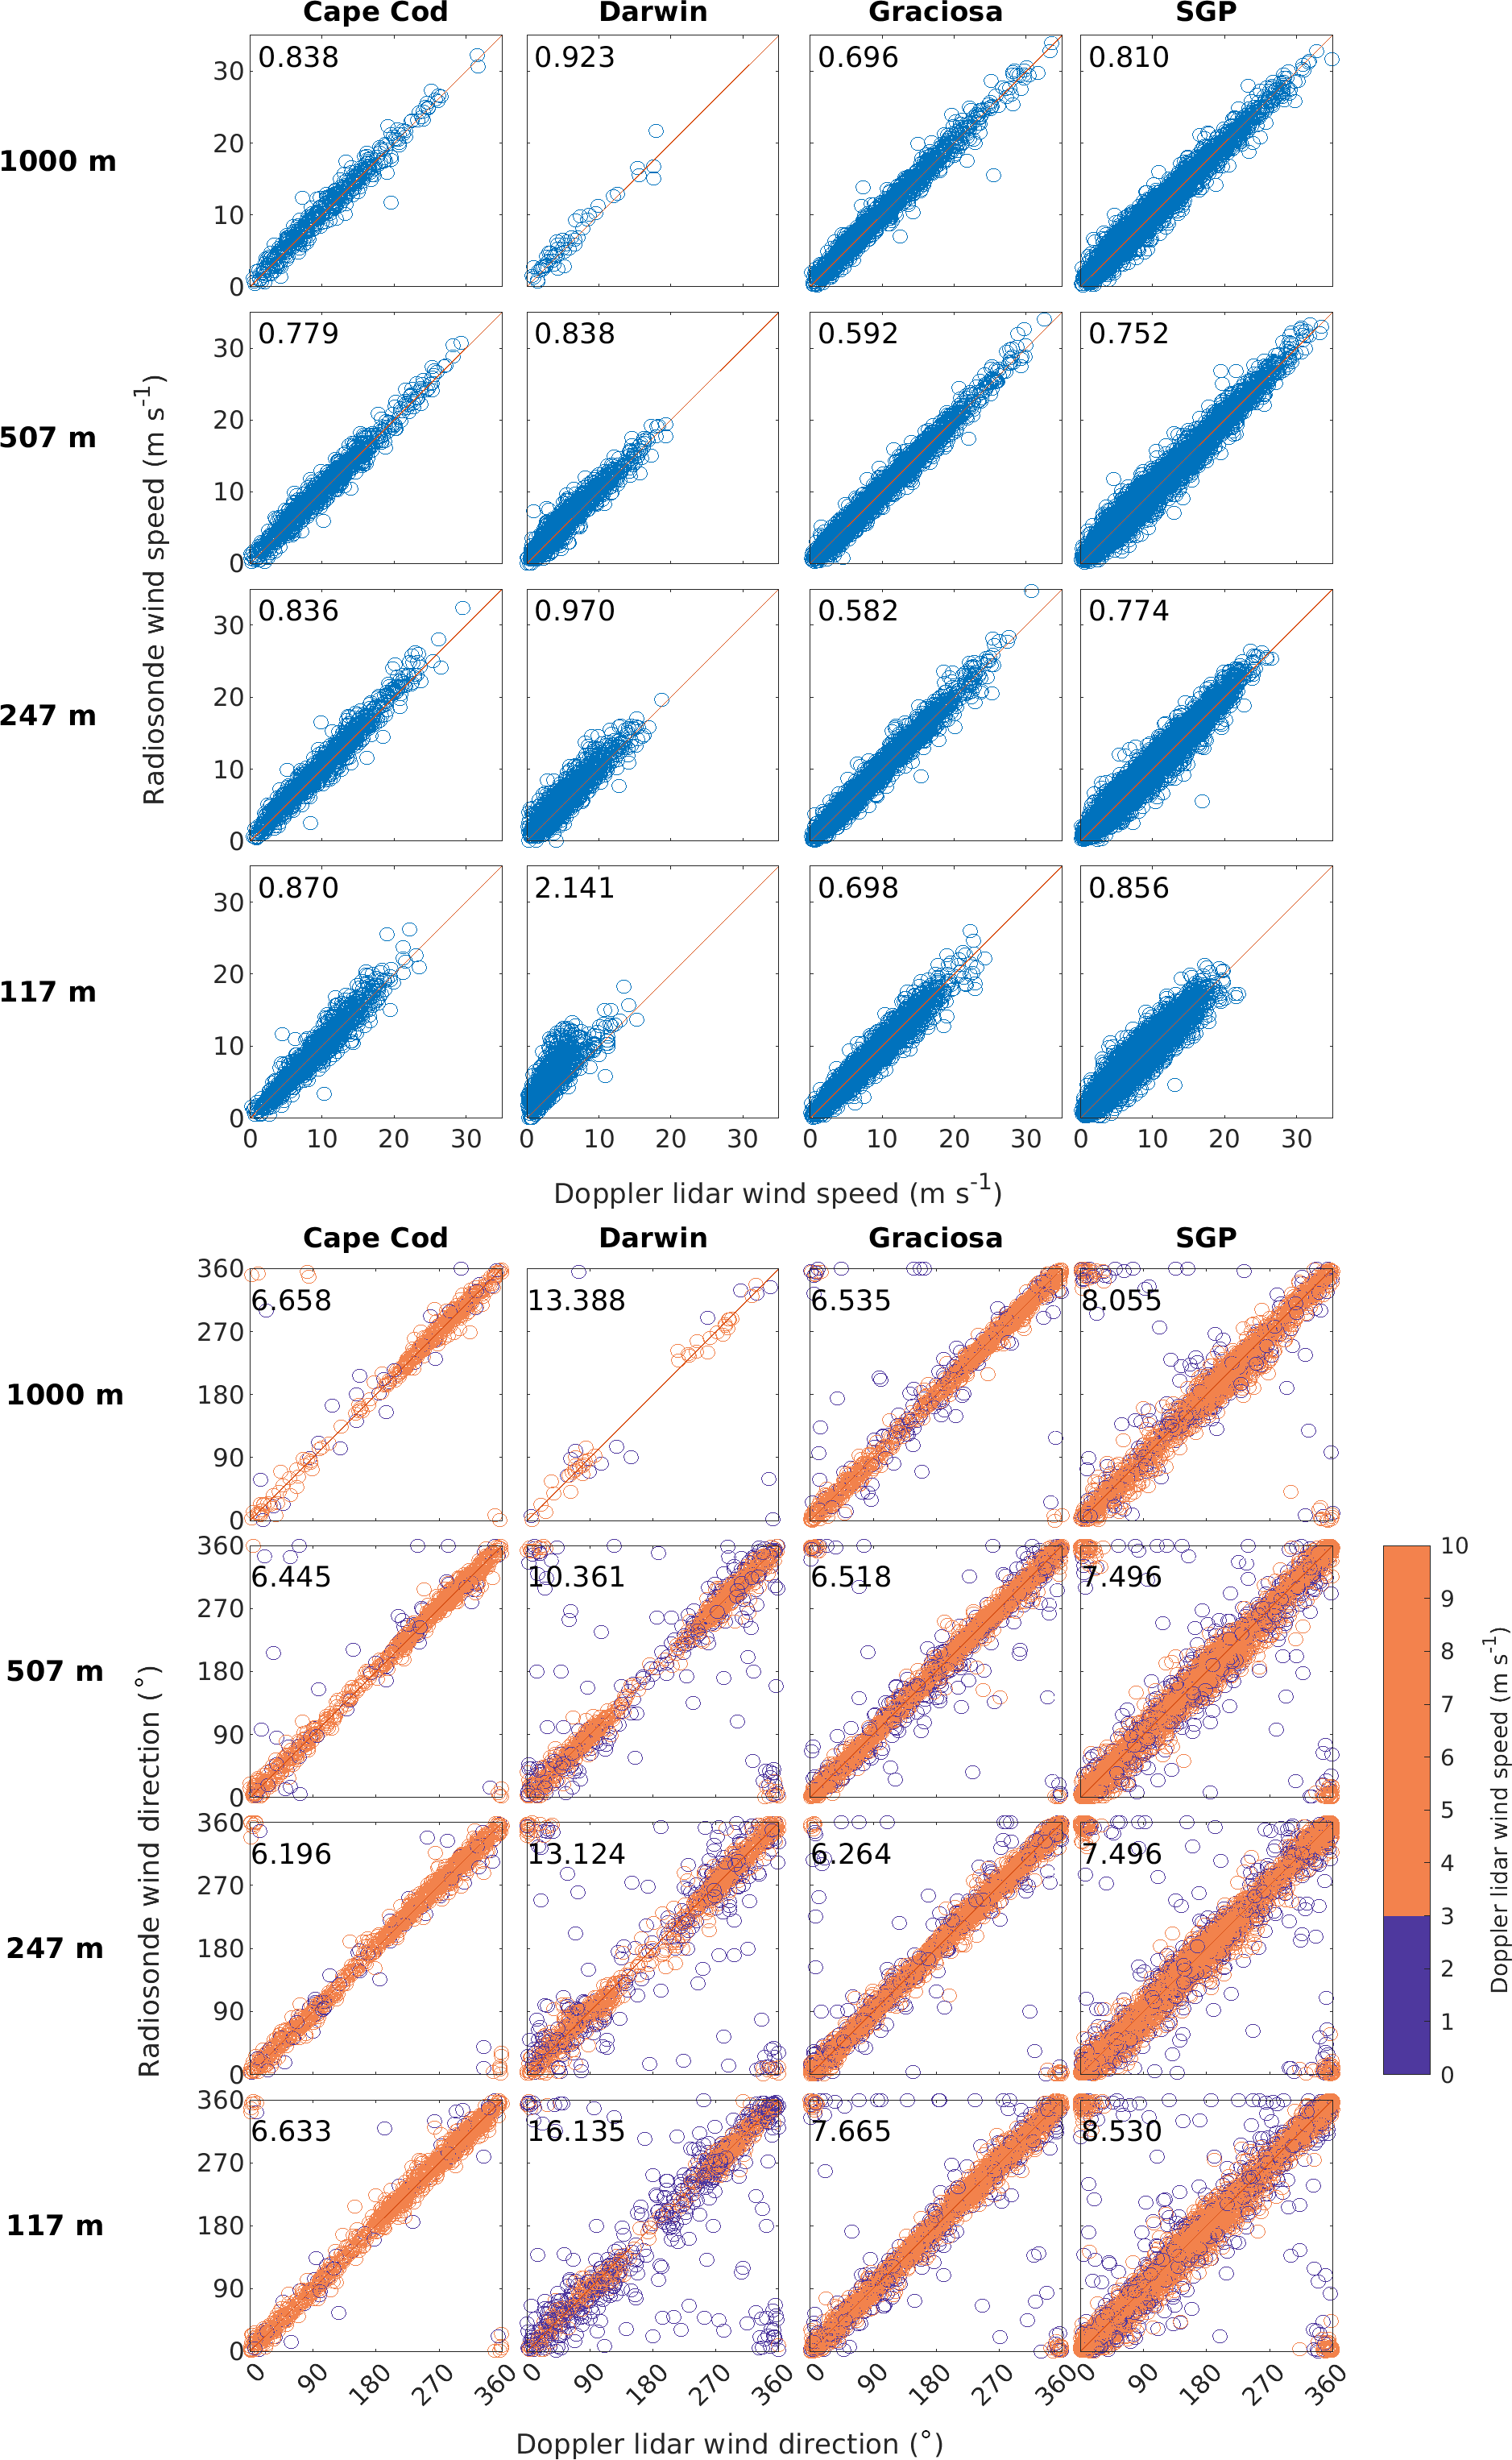 GMD - Evaluating wind profiles in a numerical weather prediction